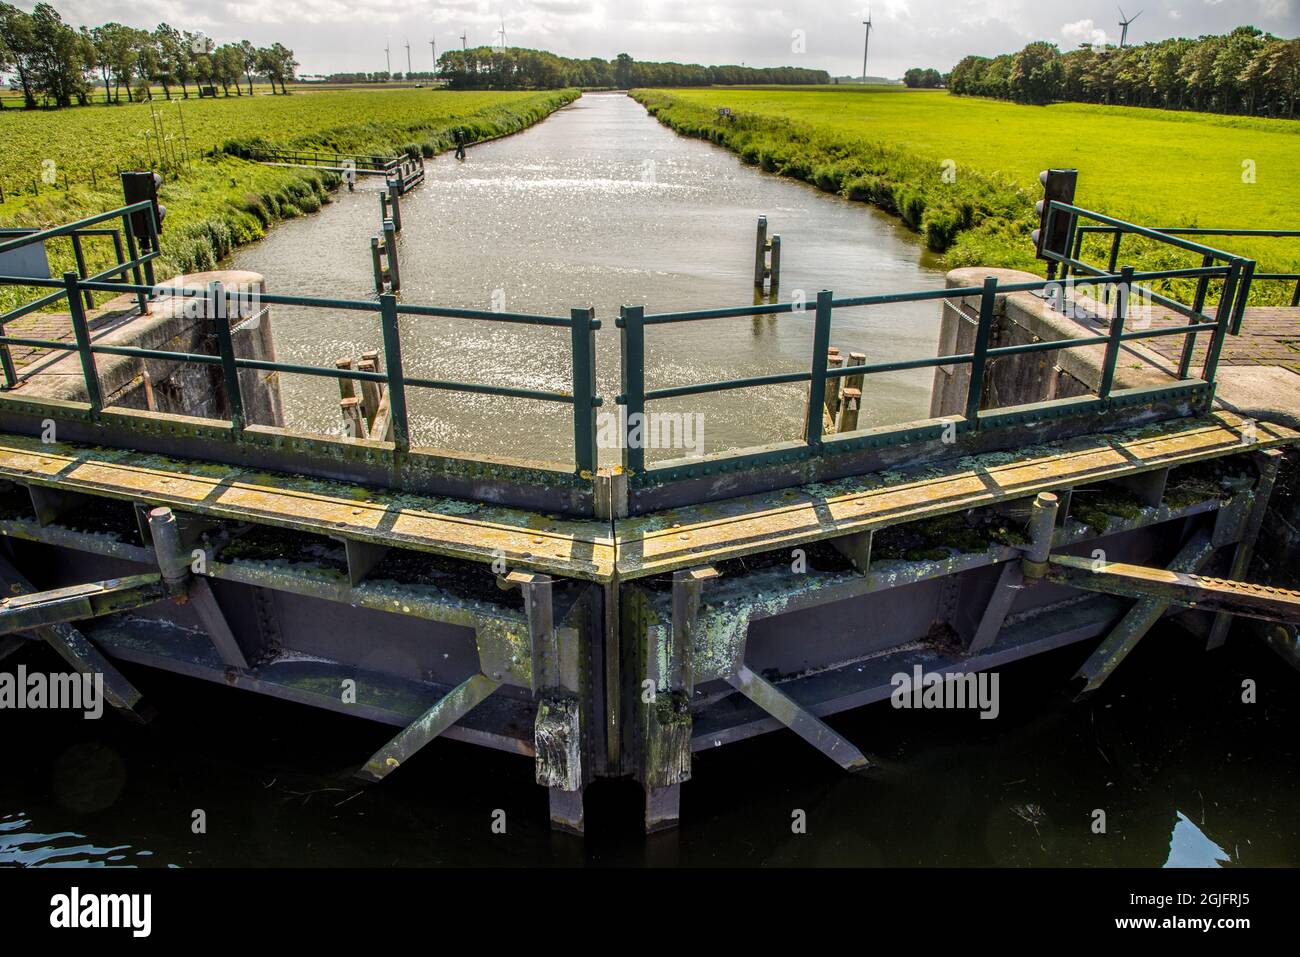 Haukes, the Netherlands. August 15, 2021. The locks at the Amstel Lake in North Holland. High quality photo Stock Photo